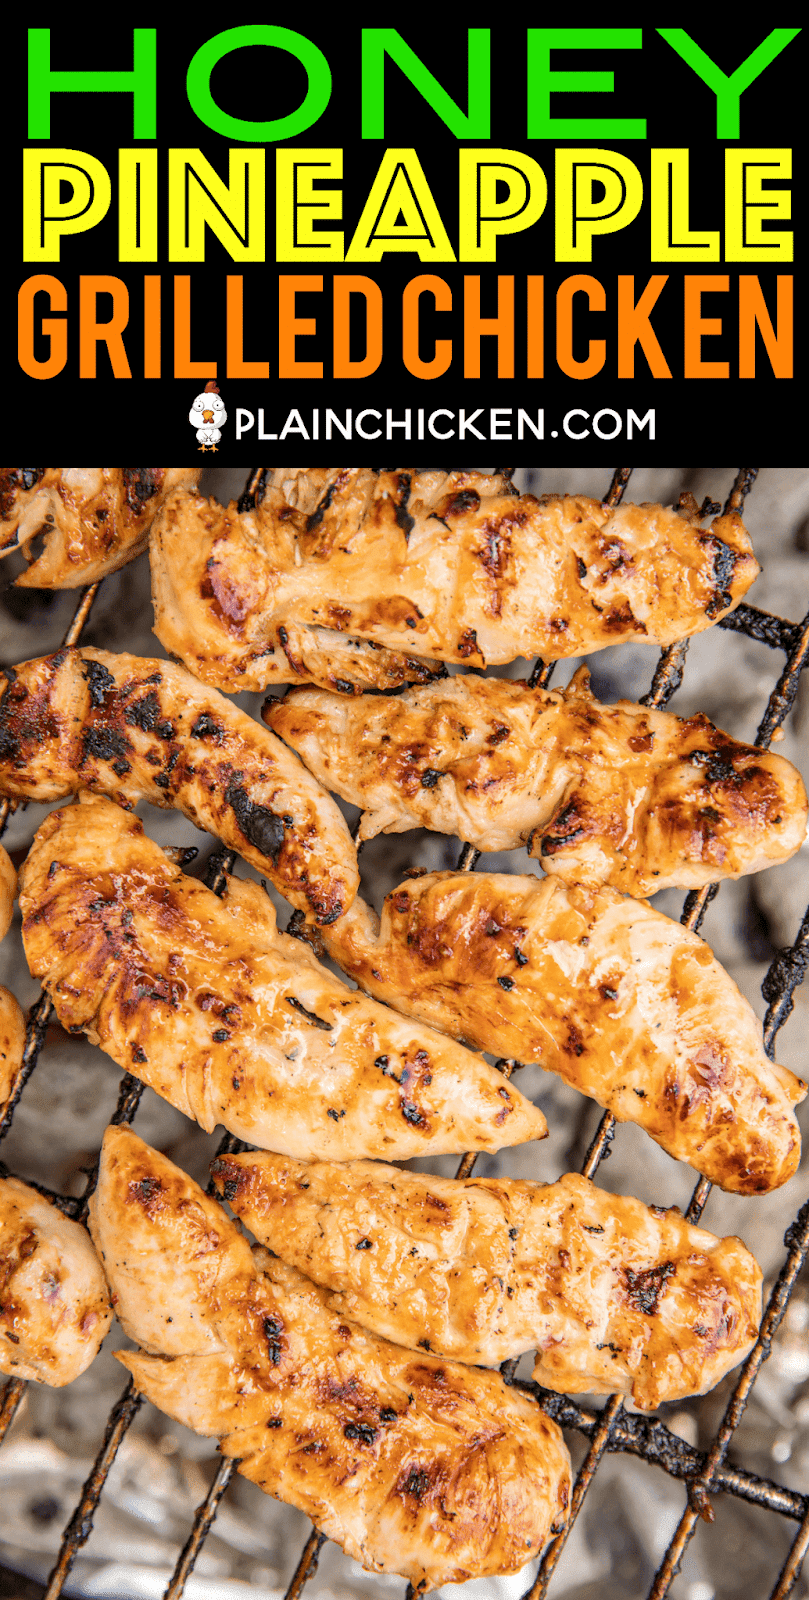 Honey Pineapple Grilled Chicken - crazy delicious!! SO simple and packed full of amazing flavor!! Only 3 ingredients in the marinade - Italian dressing, honey and pineapple juice. Can use chicken tenders, breasts or thighs. We always double the recipe for easy lunches during the week! We actually made it twice last week!! SO good! #chicken #grilling #chickenrecipes #grilled